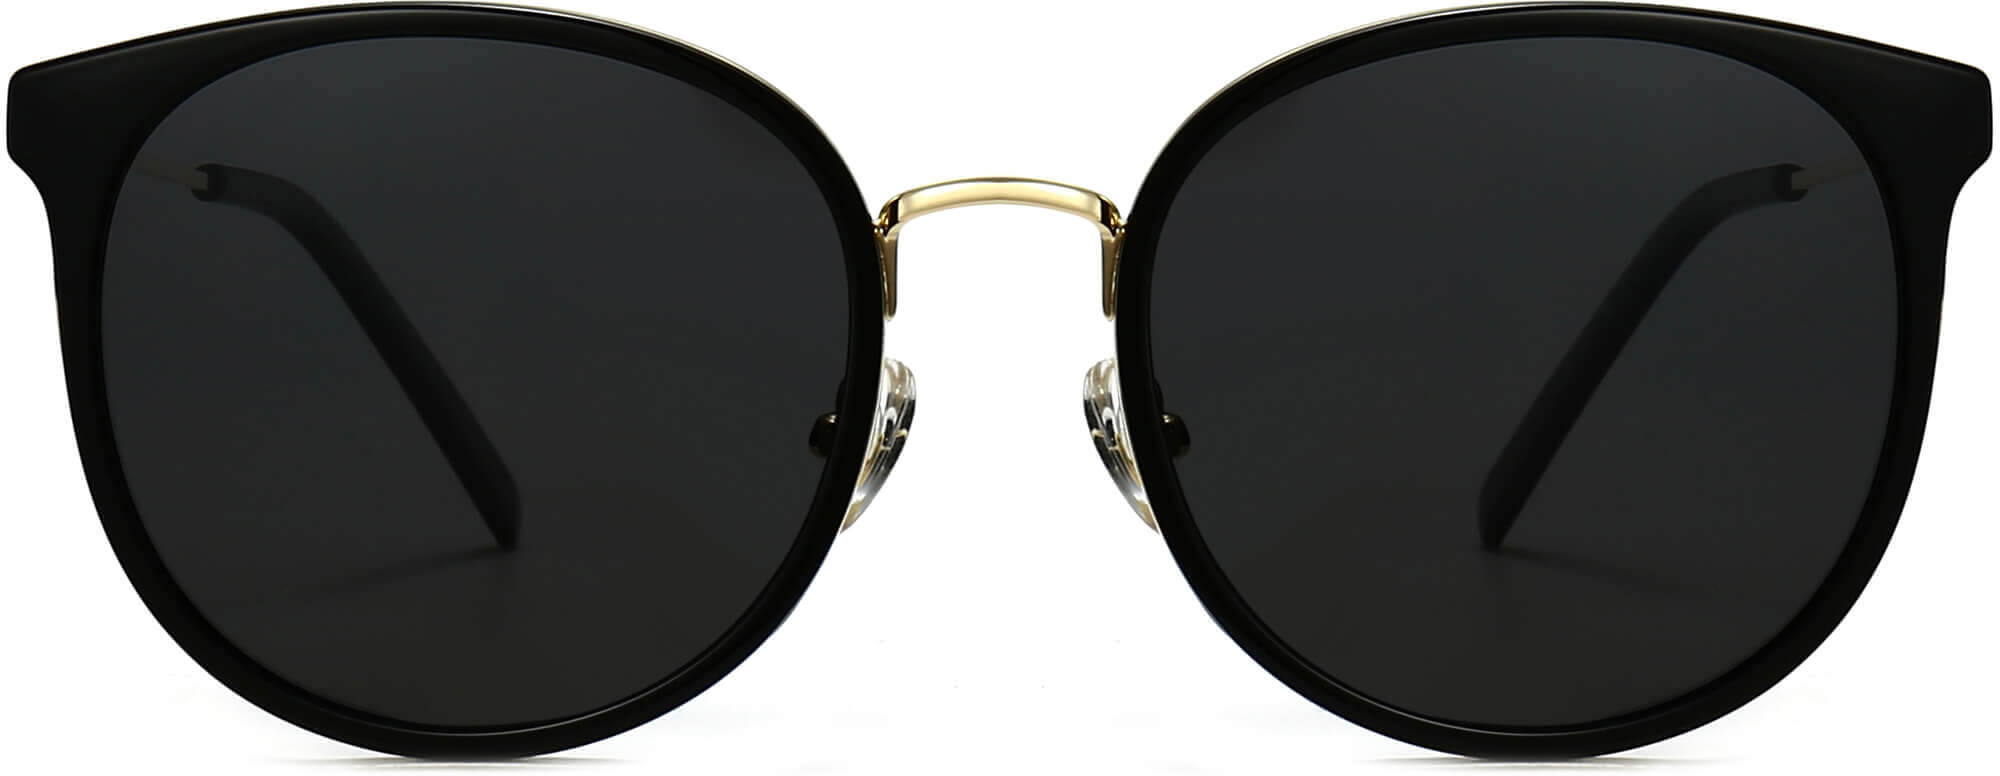 Brody Black Plastic Sunglasses from ANRRI, front view